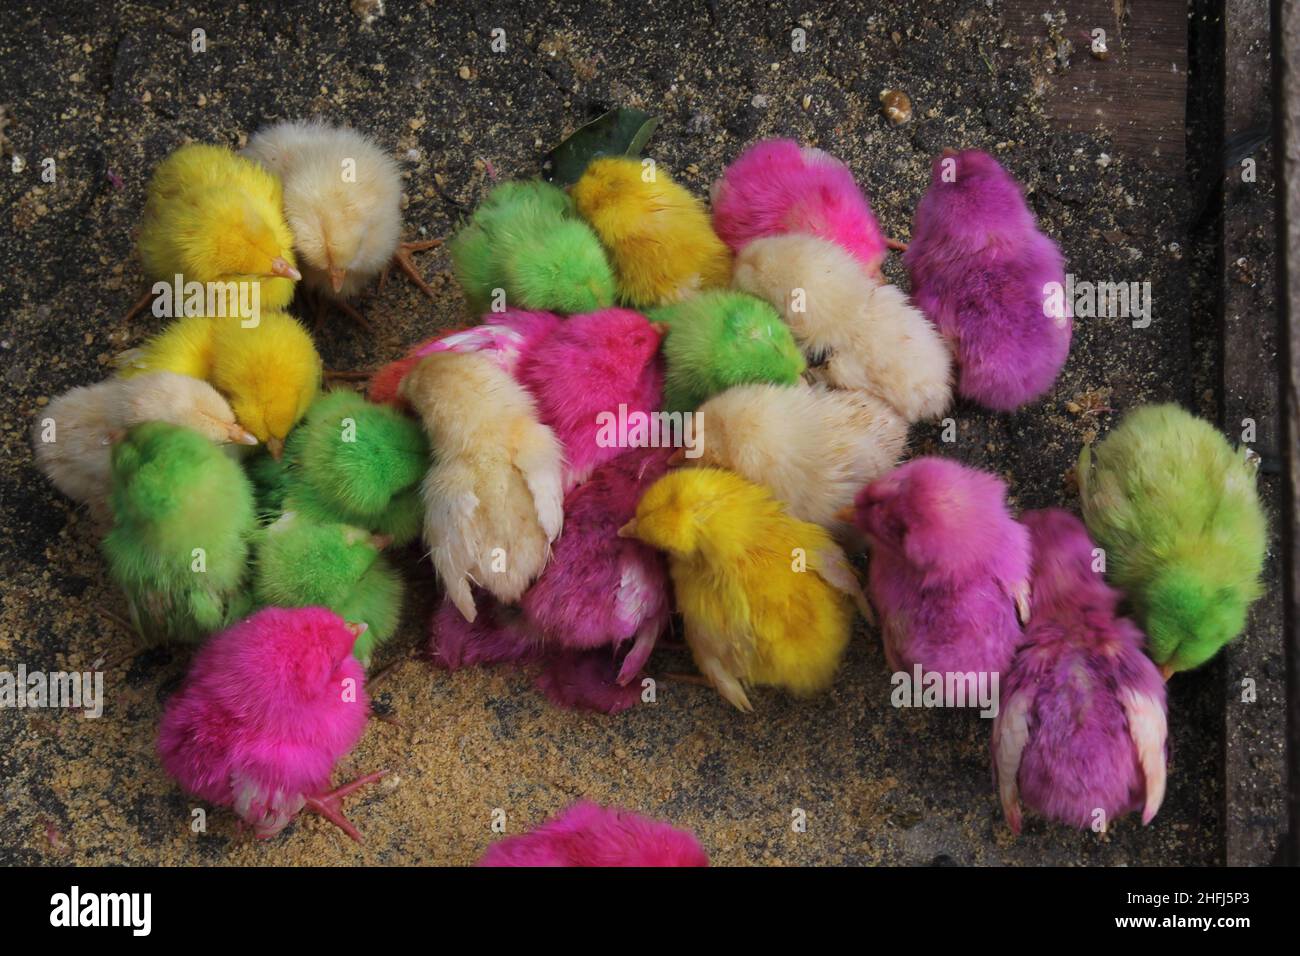 colorful birds for pets at the animal market. Stock Photo